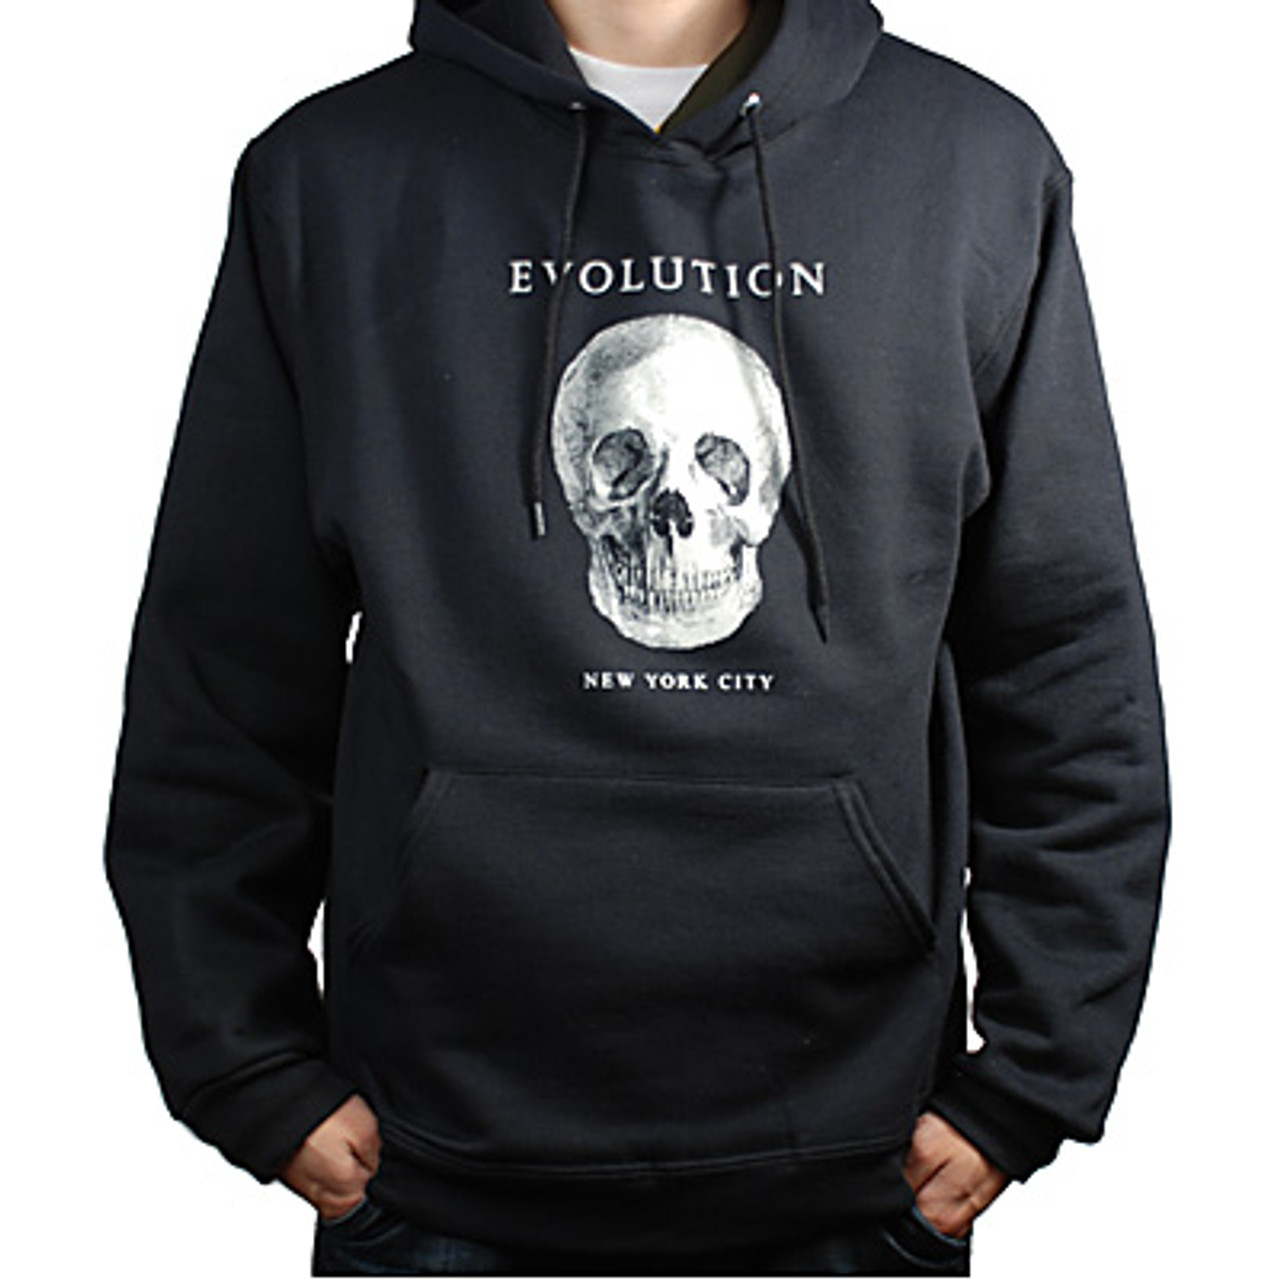 Evolution Skull Hoodie: A Modern Classic Inspired by Historic